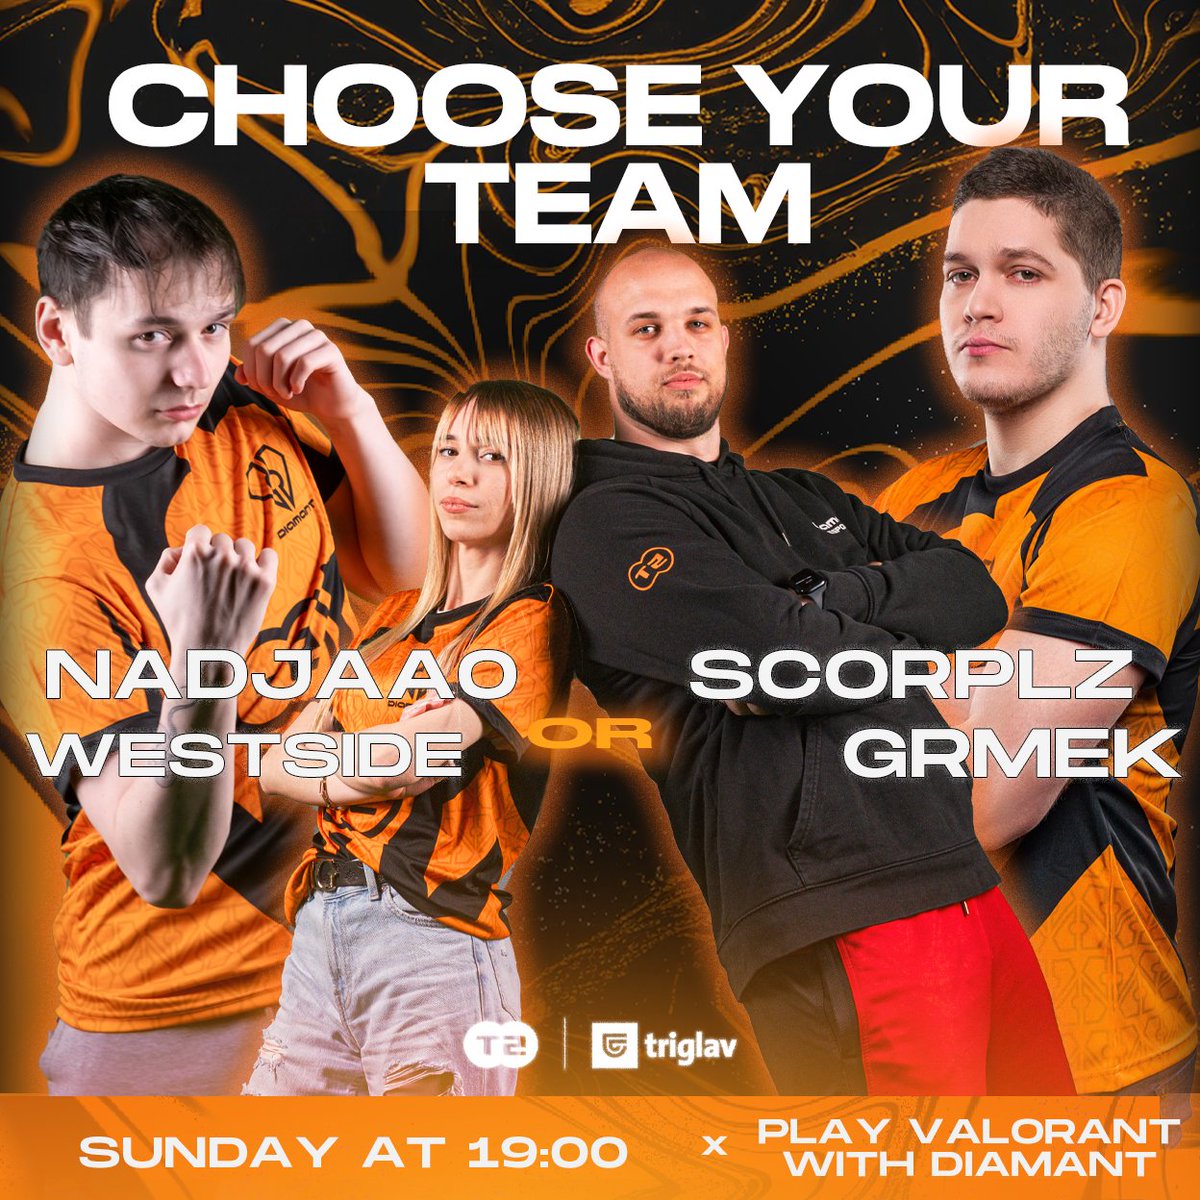 Come play #VALORANT with Diamant 💎 SUNDAY at 19:00 CEST 🕖 Join @nadjaa0_ttv's Twitch to play with 🇵🇱@euwestside or @scorp_lz's YouTube stream for 🇸🇮@grmek77 and see if you can beat the pros 💪